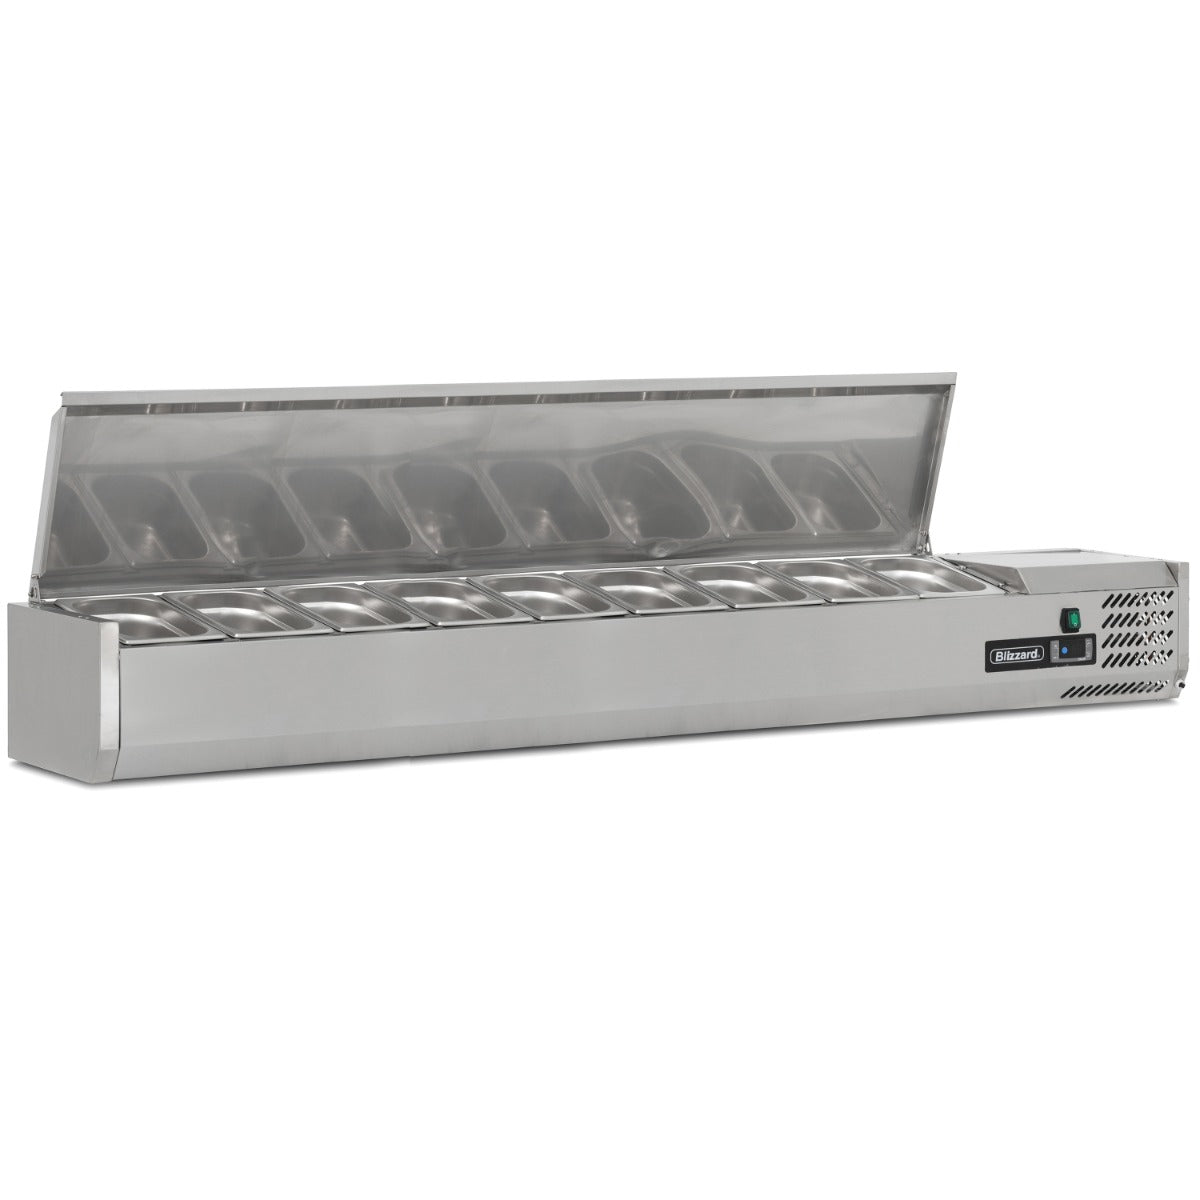 Blizzard 1/3 Gastronorm Prep Top with Hinged Lid 2000mm(W)